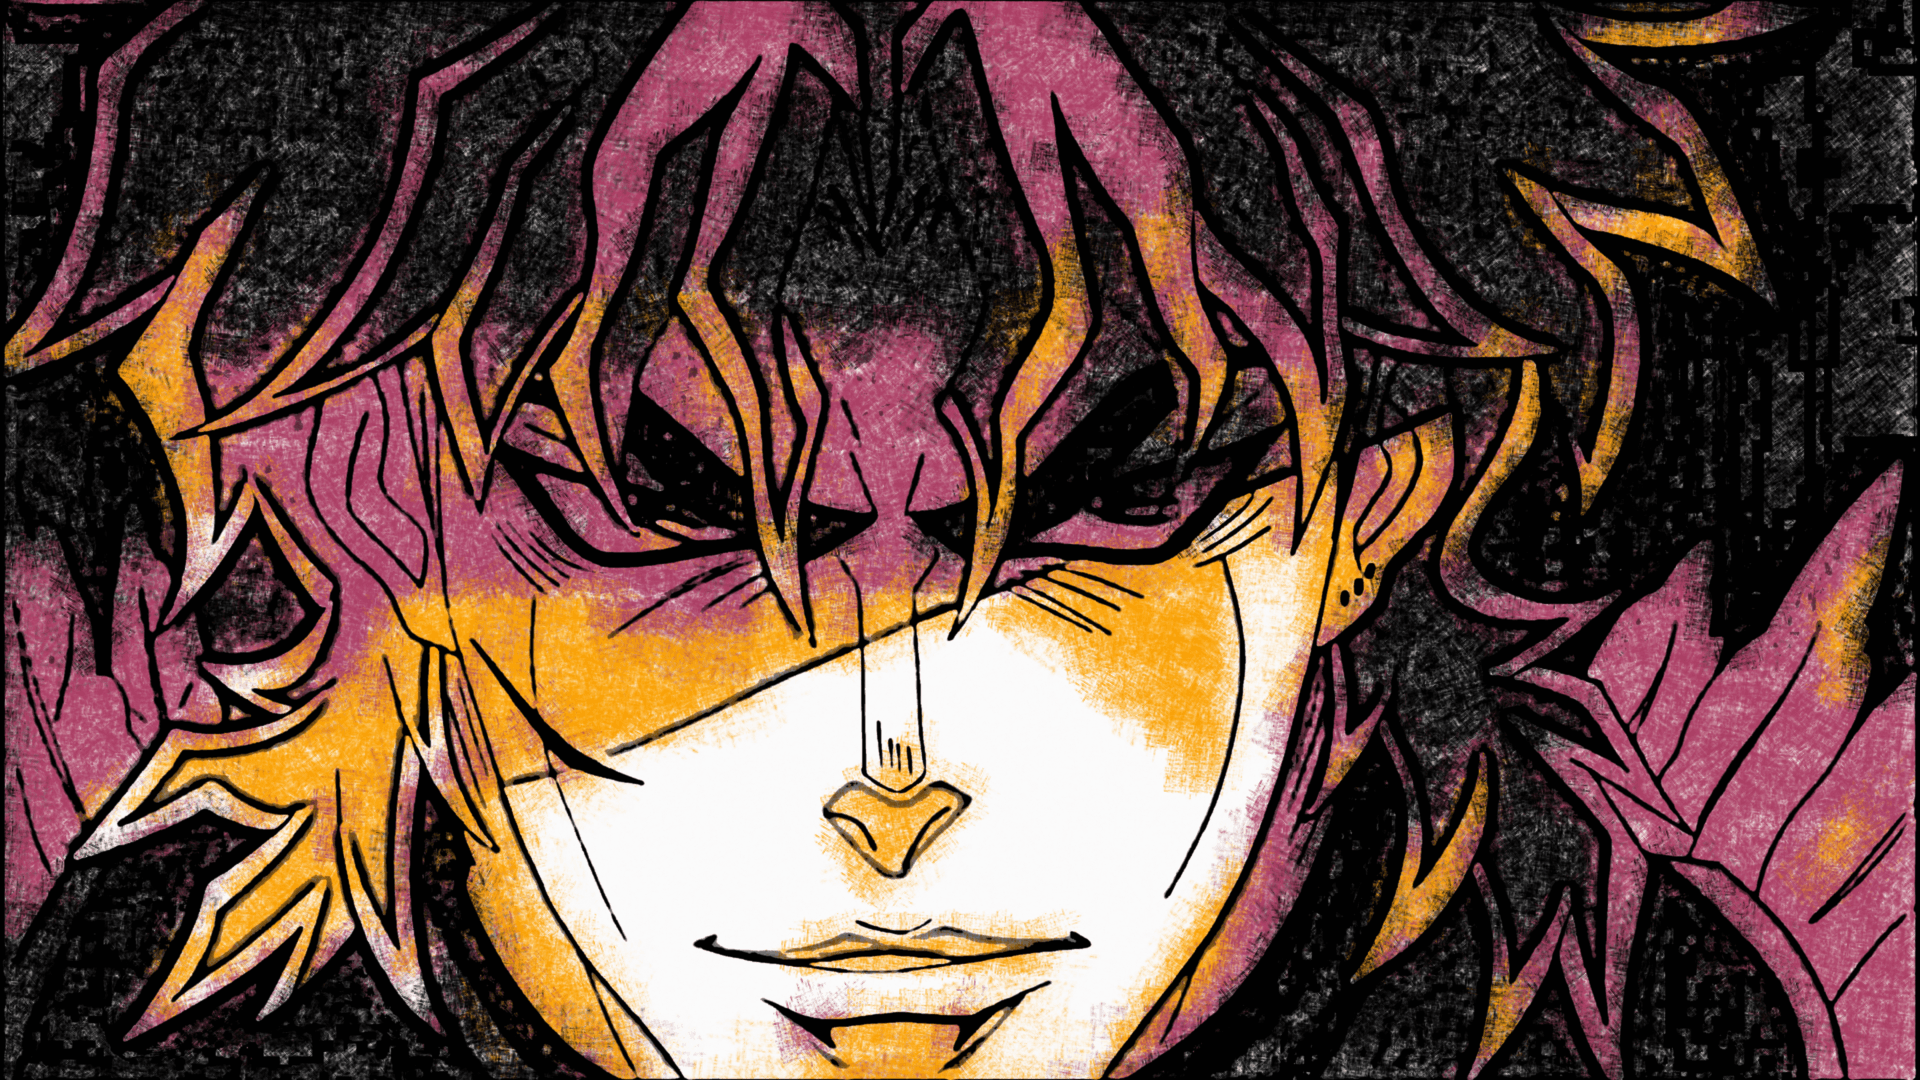 11 Dio Brando Wallpapers for iPhone and Android by Randall Burton